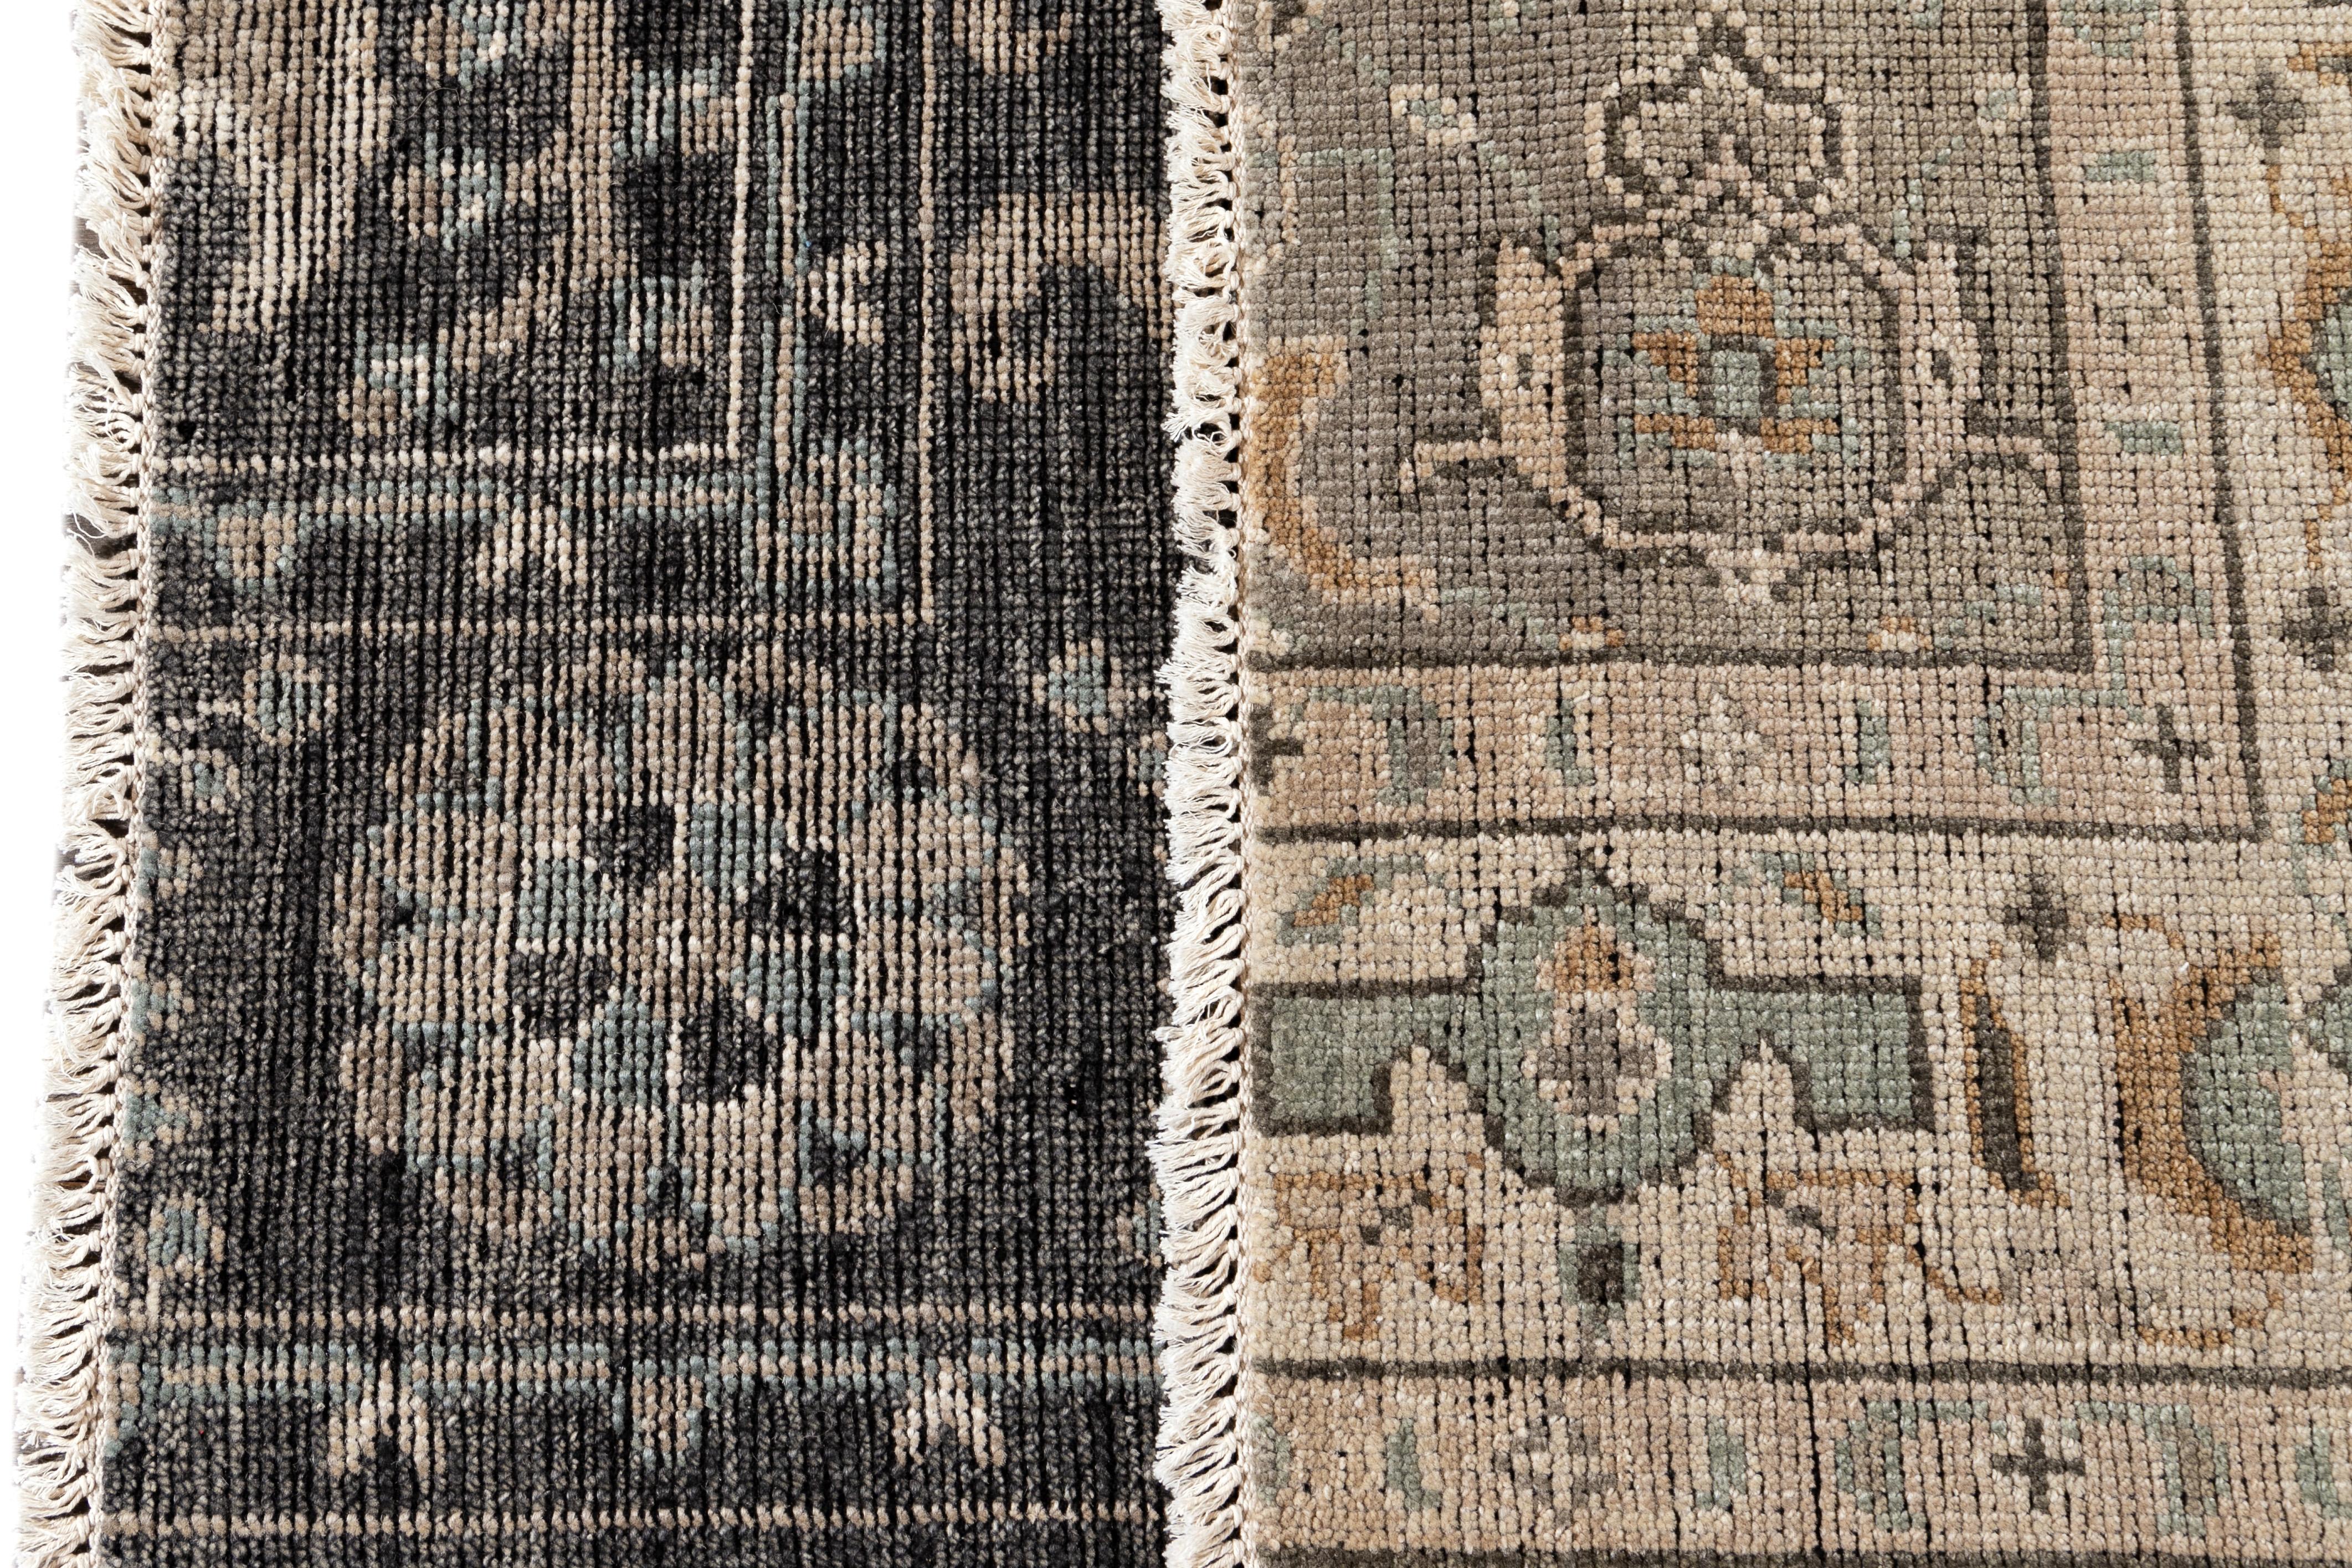 Oushak-style custom rug. Custom sizes and colors made-to-order.

Material: Hand knotted Wool
Lead time: Approx. 12 weeks
Available colors: As shown; other custom colors and styles available.
Made in India.

Price listed as an 8' x 10'.